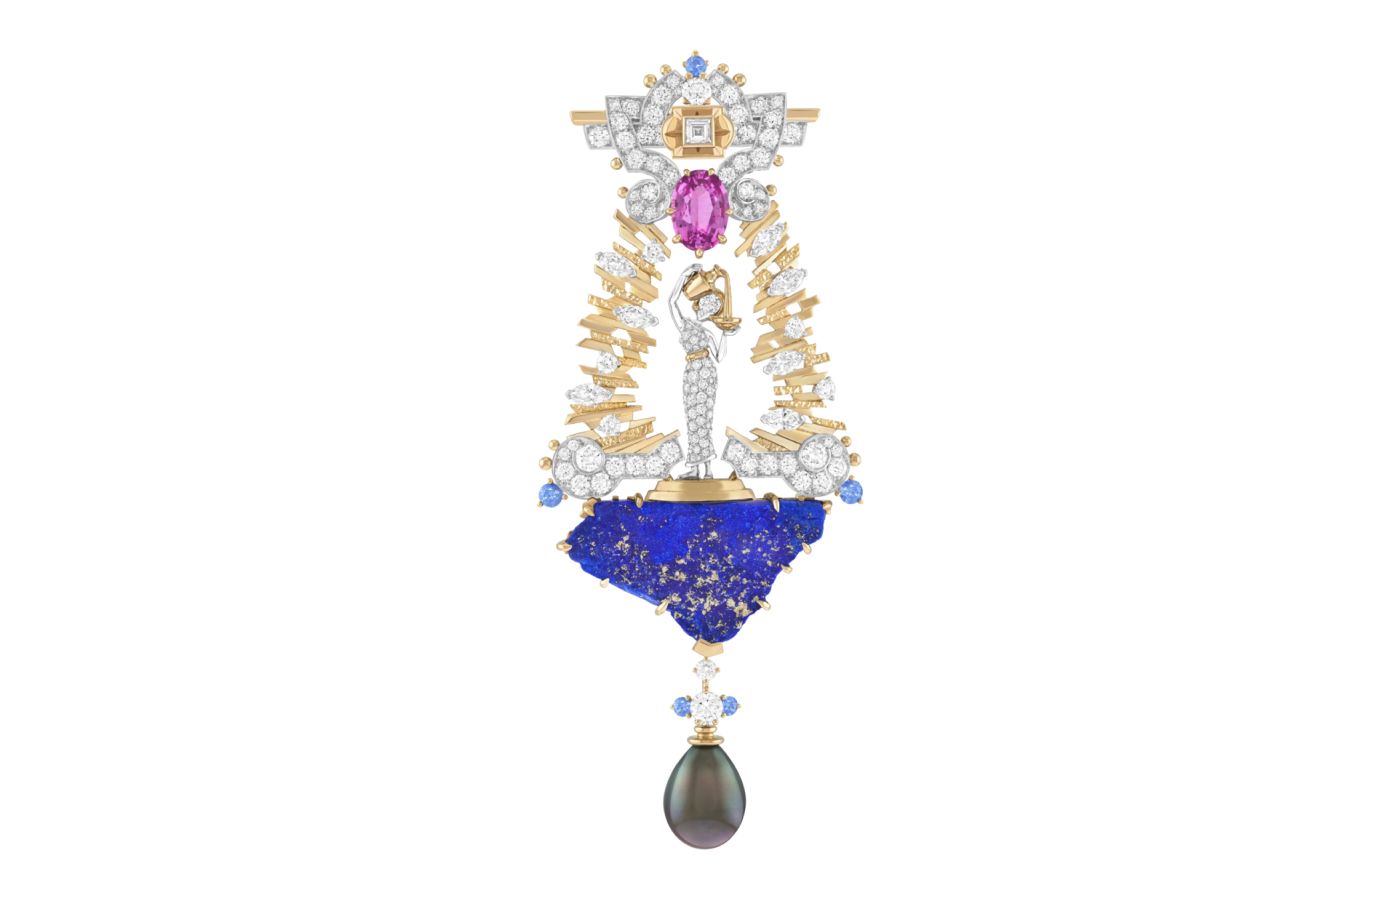 Van Cleef & Arpels Dea Eterna clip in gold, white gold, rose gold, featuring a 3.47-ct oval-cut pink sapphire, blue sapphires, lapis lazuli, gray cultured pearl and diamonds from Le Grand Tour High Jewellery Collection